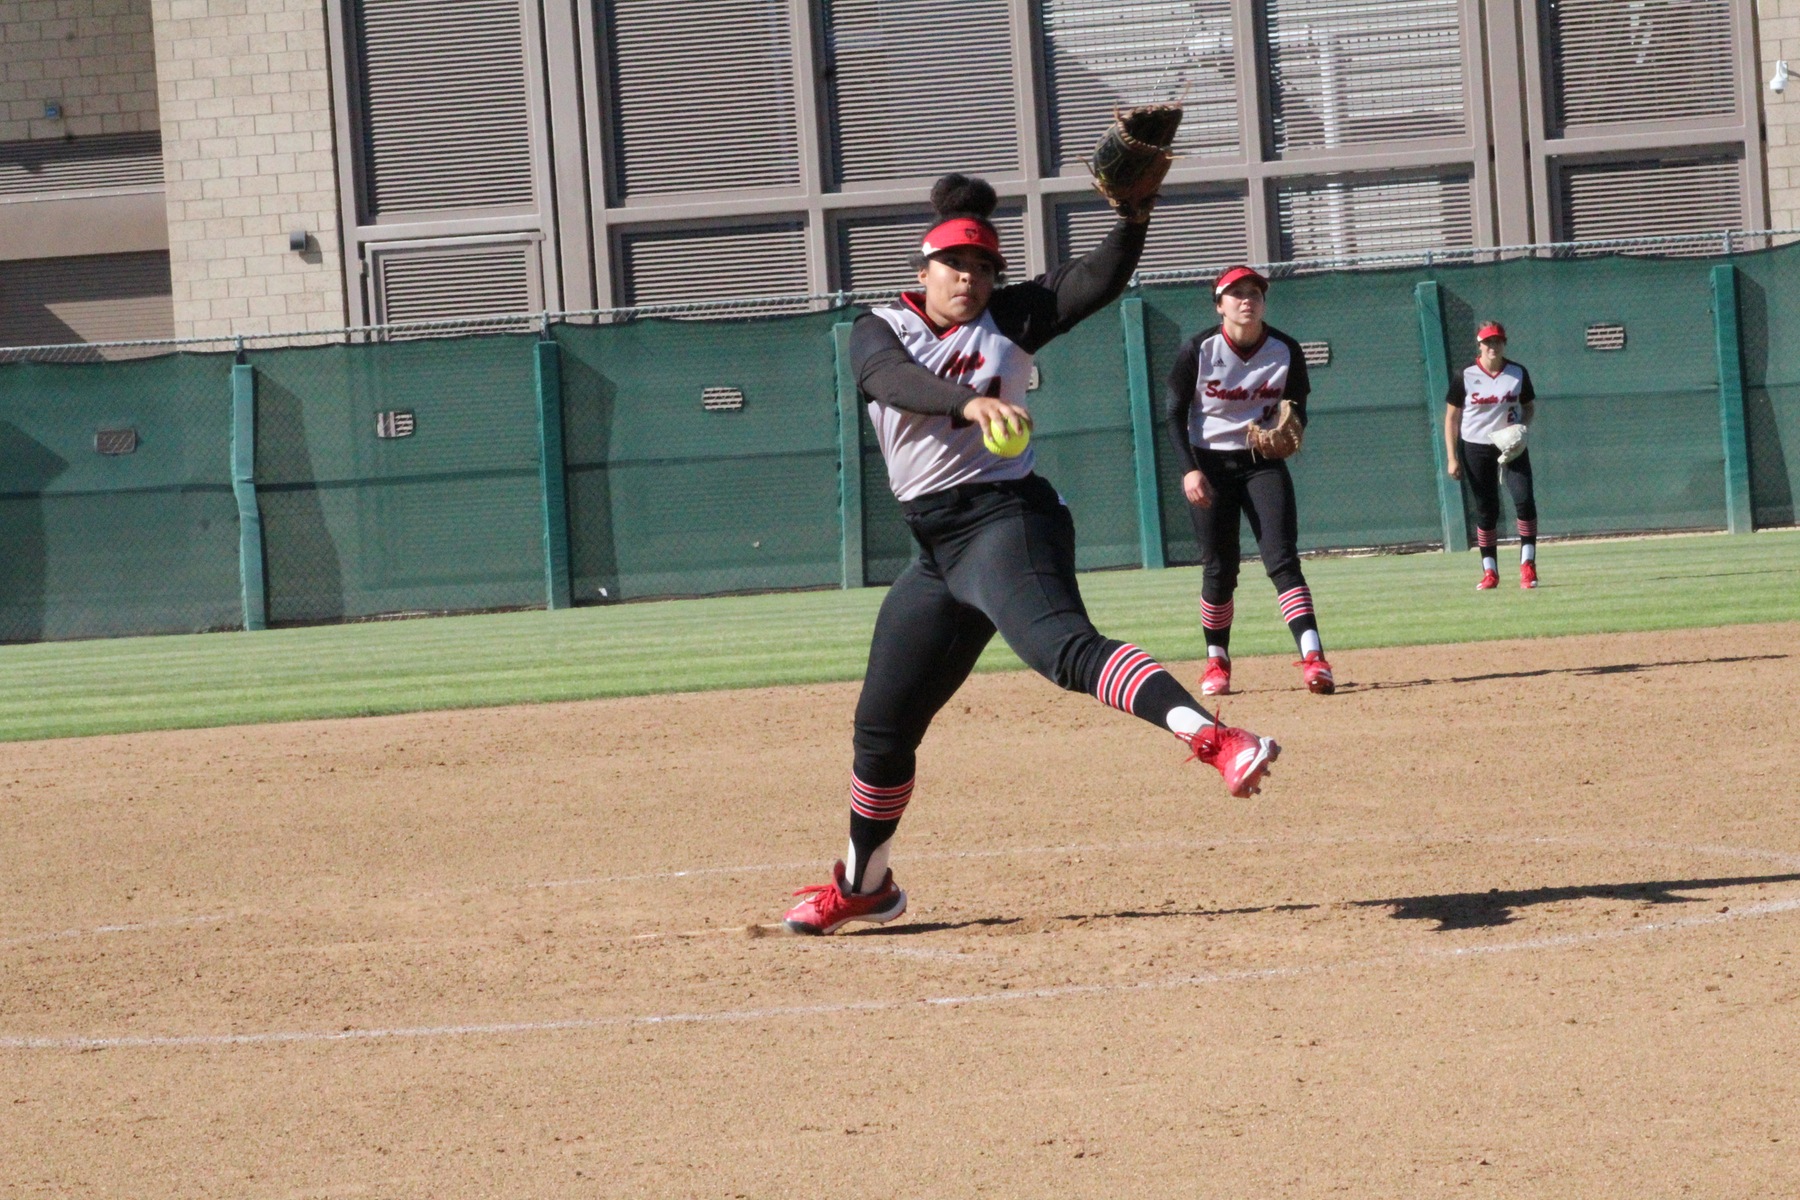 Dons Win by Run Rule in Non-Conference Game Against Grossmont